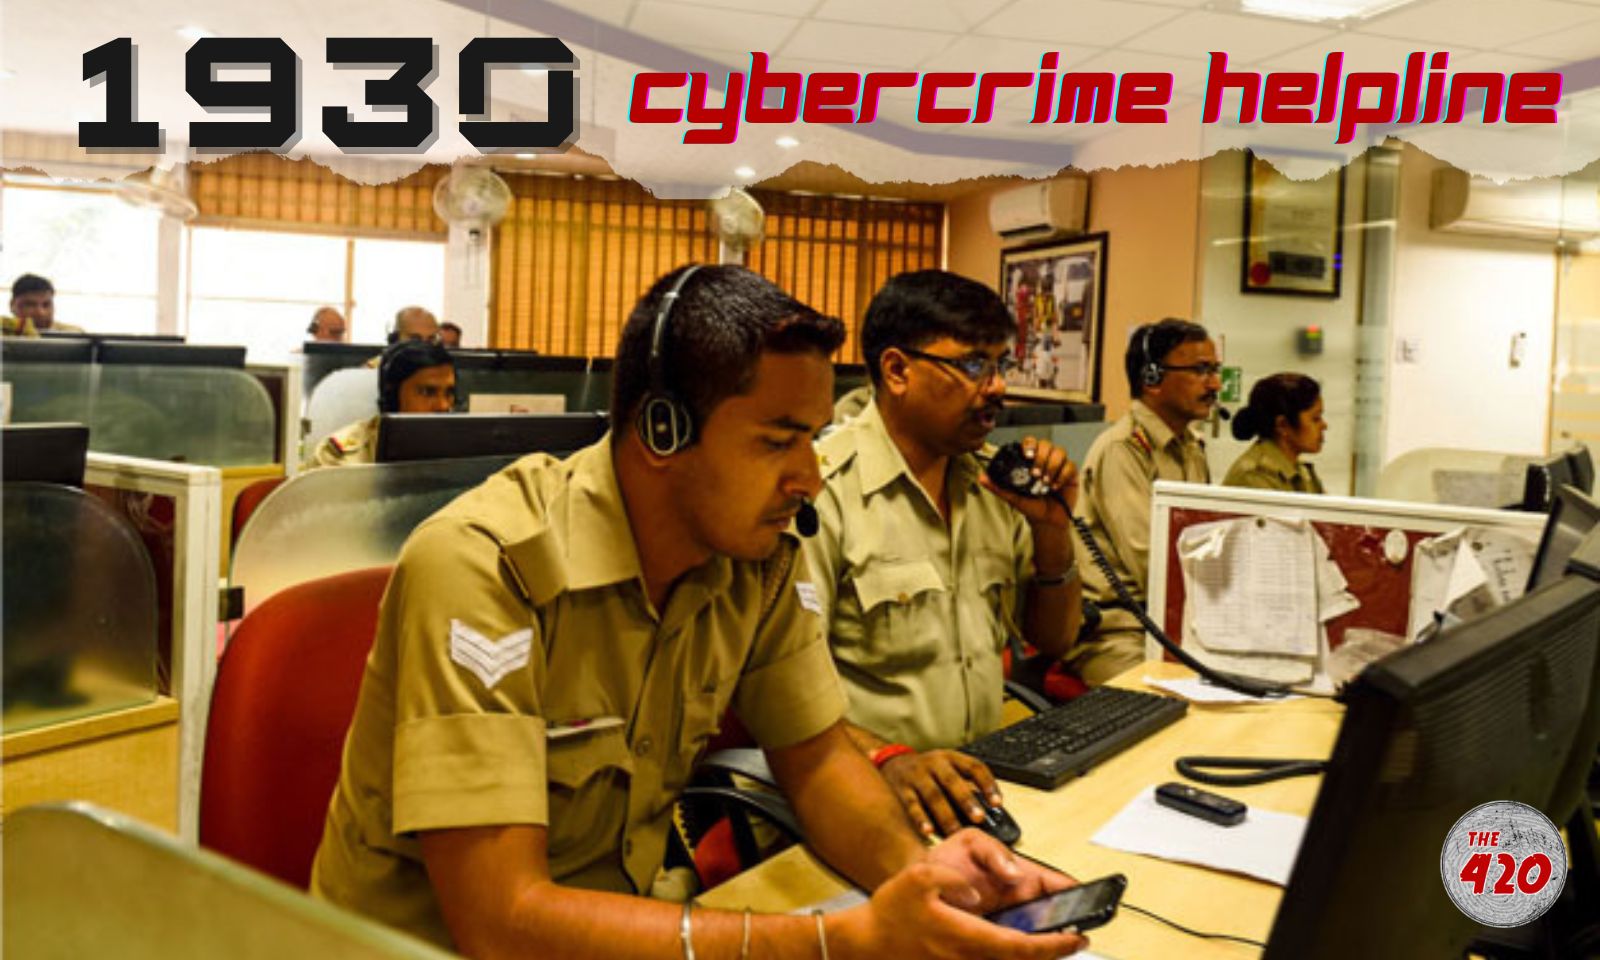 Rising Cybercrimes Prompt Mumbai Police to Strengthen '1930' Helpline